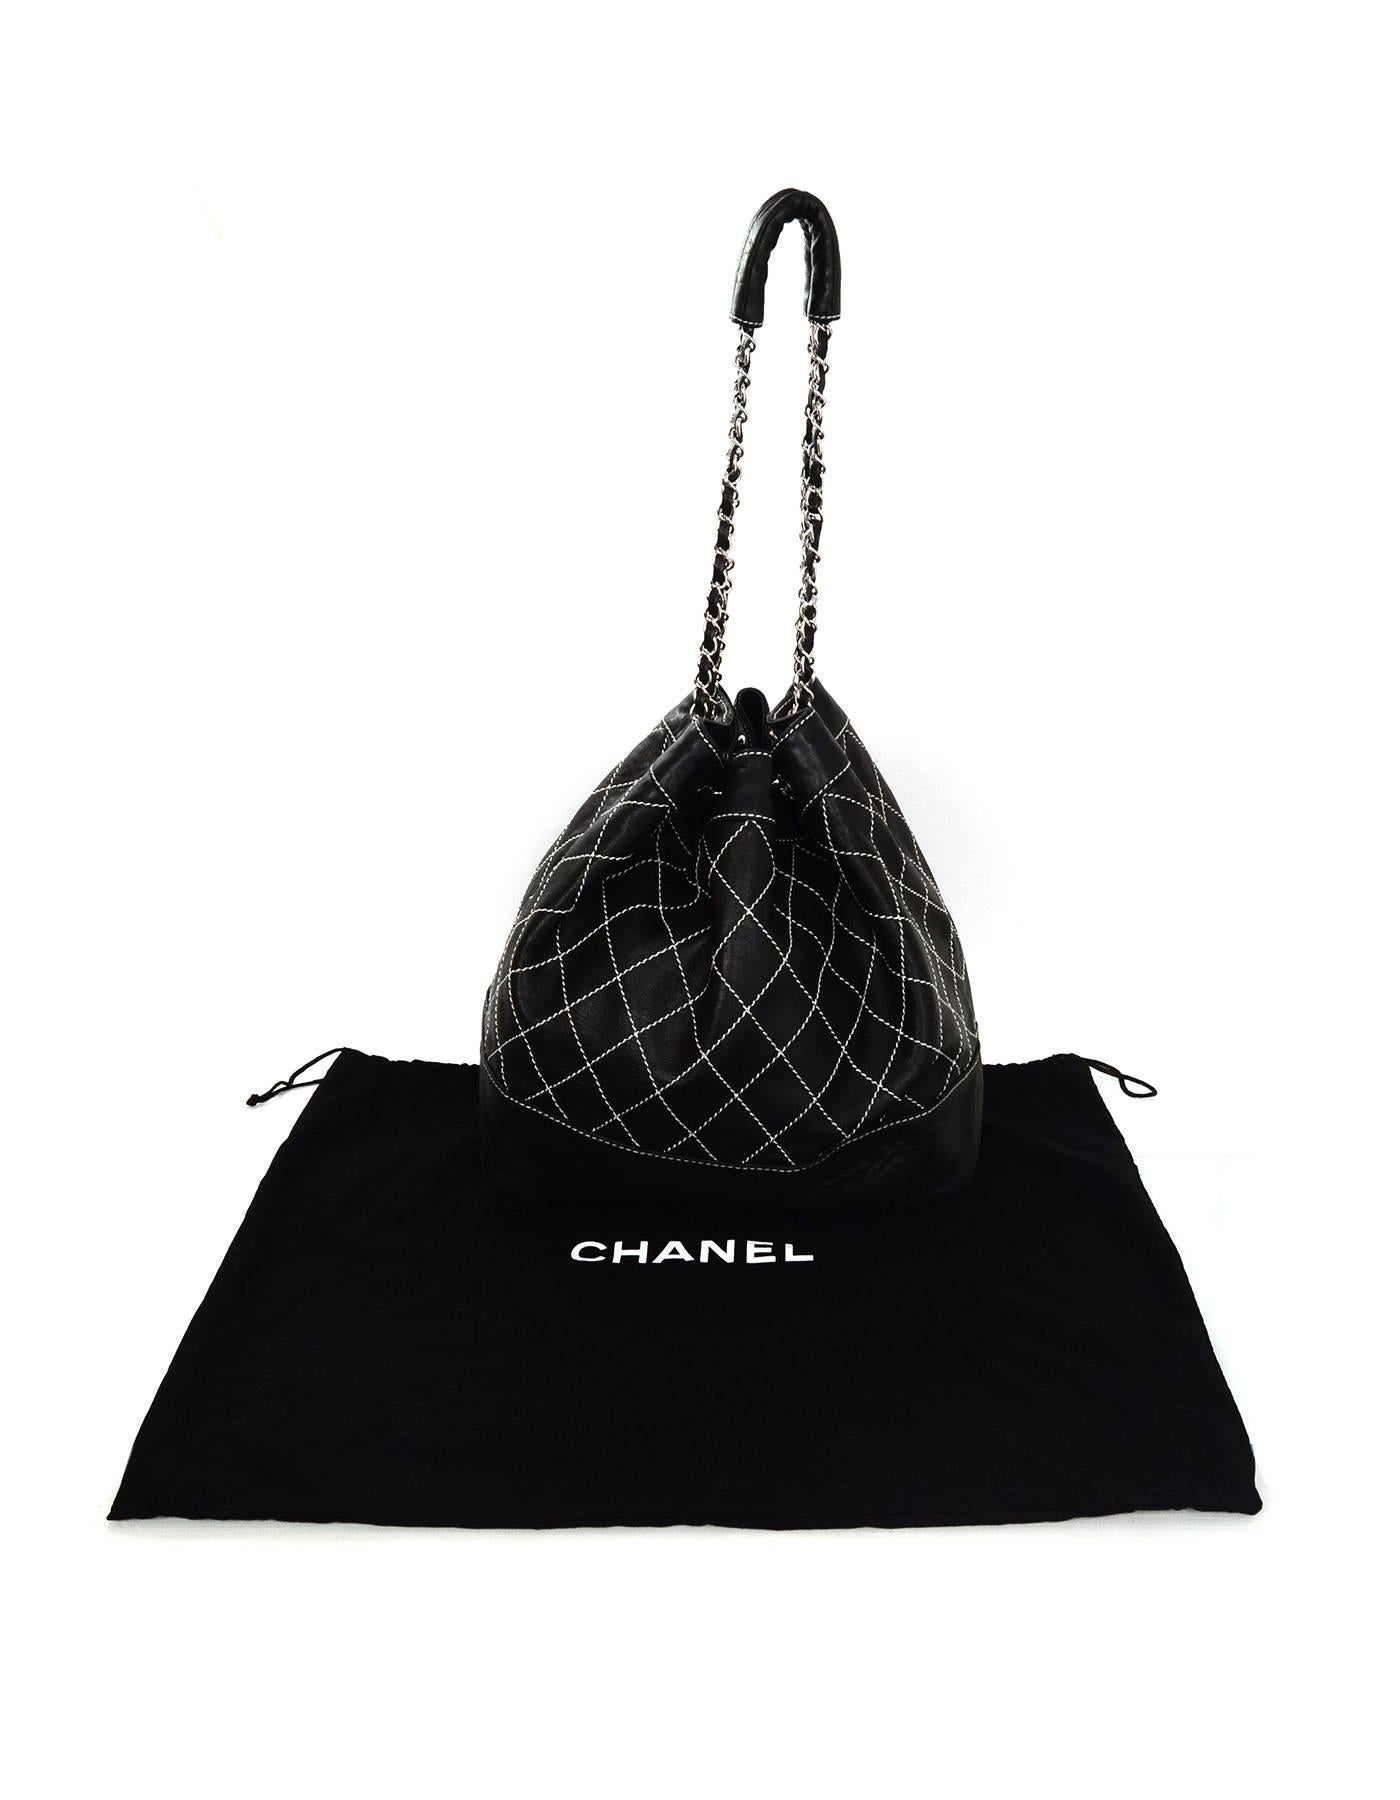 Chanel Black Leather Contrast Quilted Surpique Bucket Bag 6